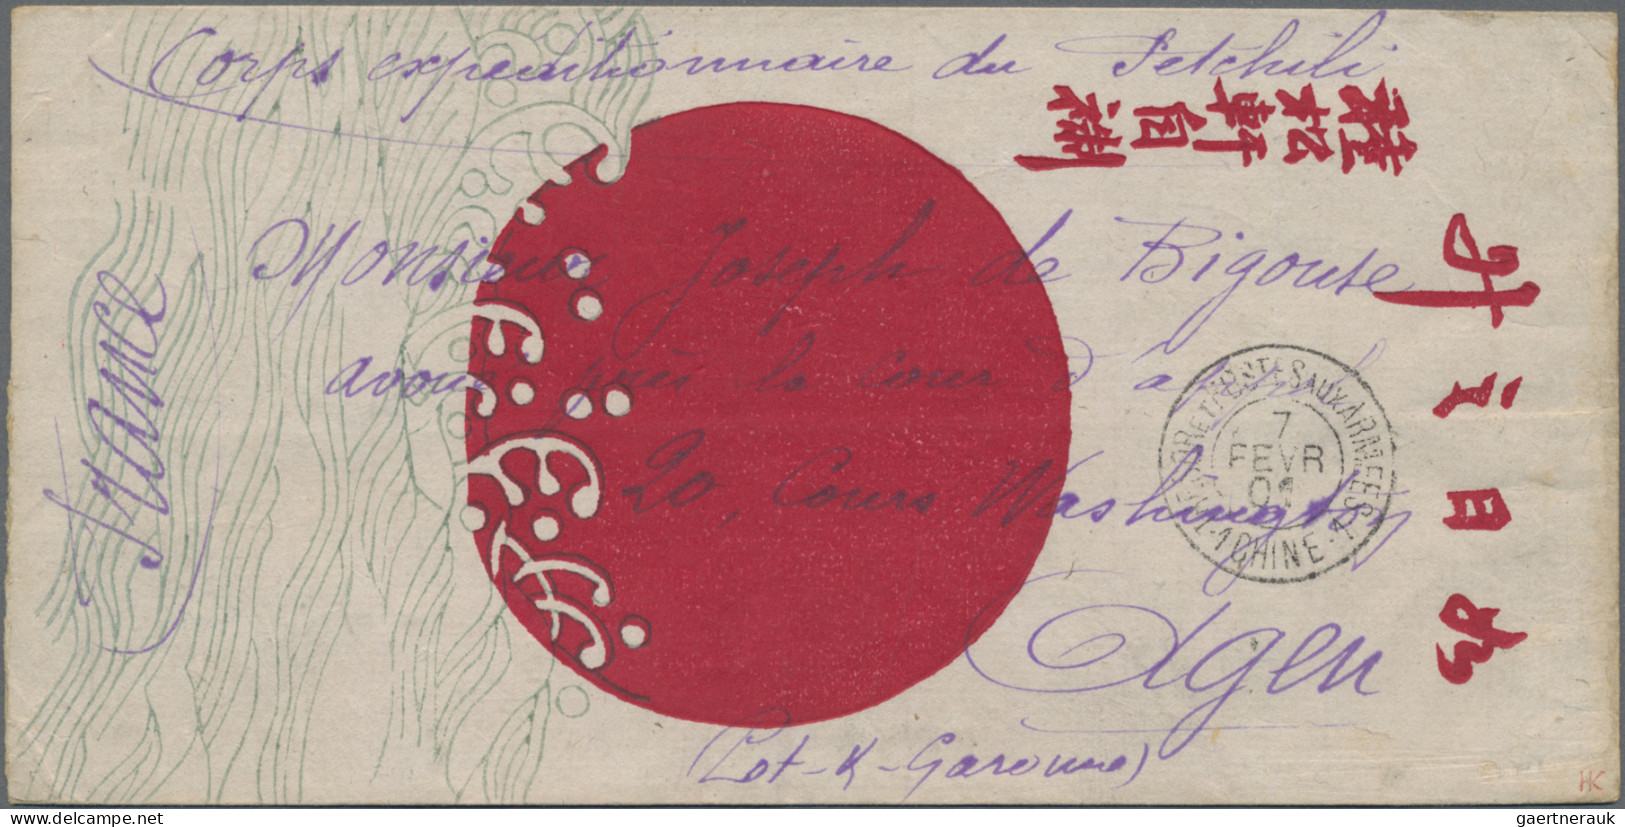 France - Field Post: 1901, French Petchili-Expedition, Decorative Cover From Pek - Francobolli  Di Franchigia Militare